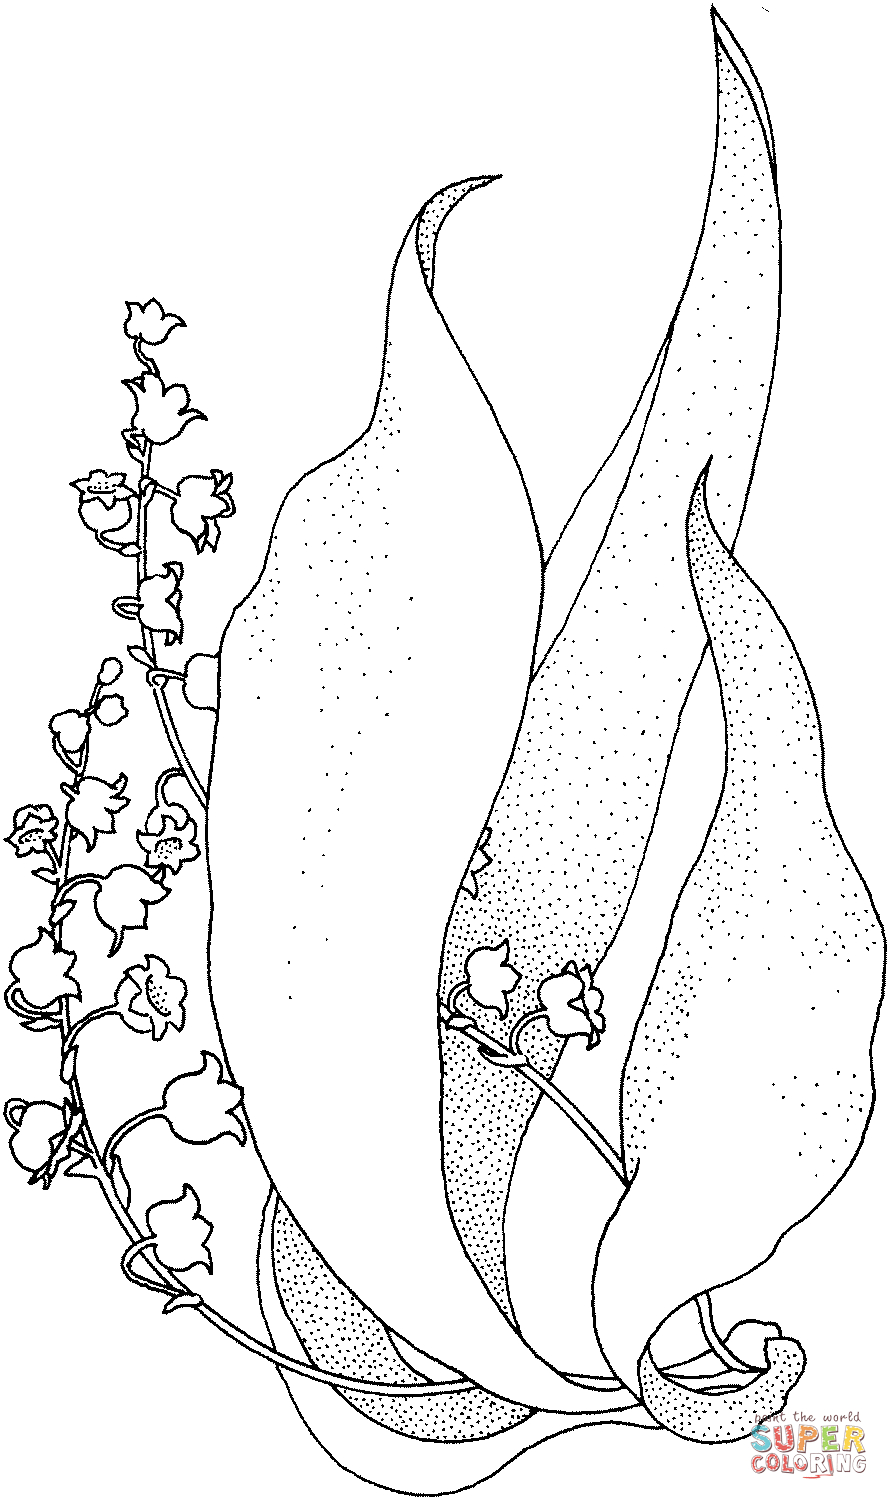 Lily Of The Valley Coloring Page Lily Of The Valley 1 Coloring Page Free Printable Coloring Pages